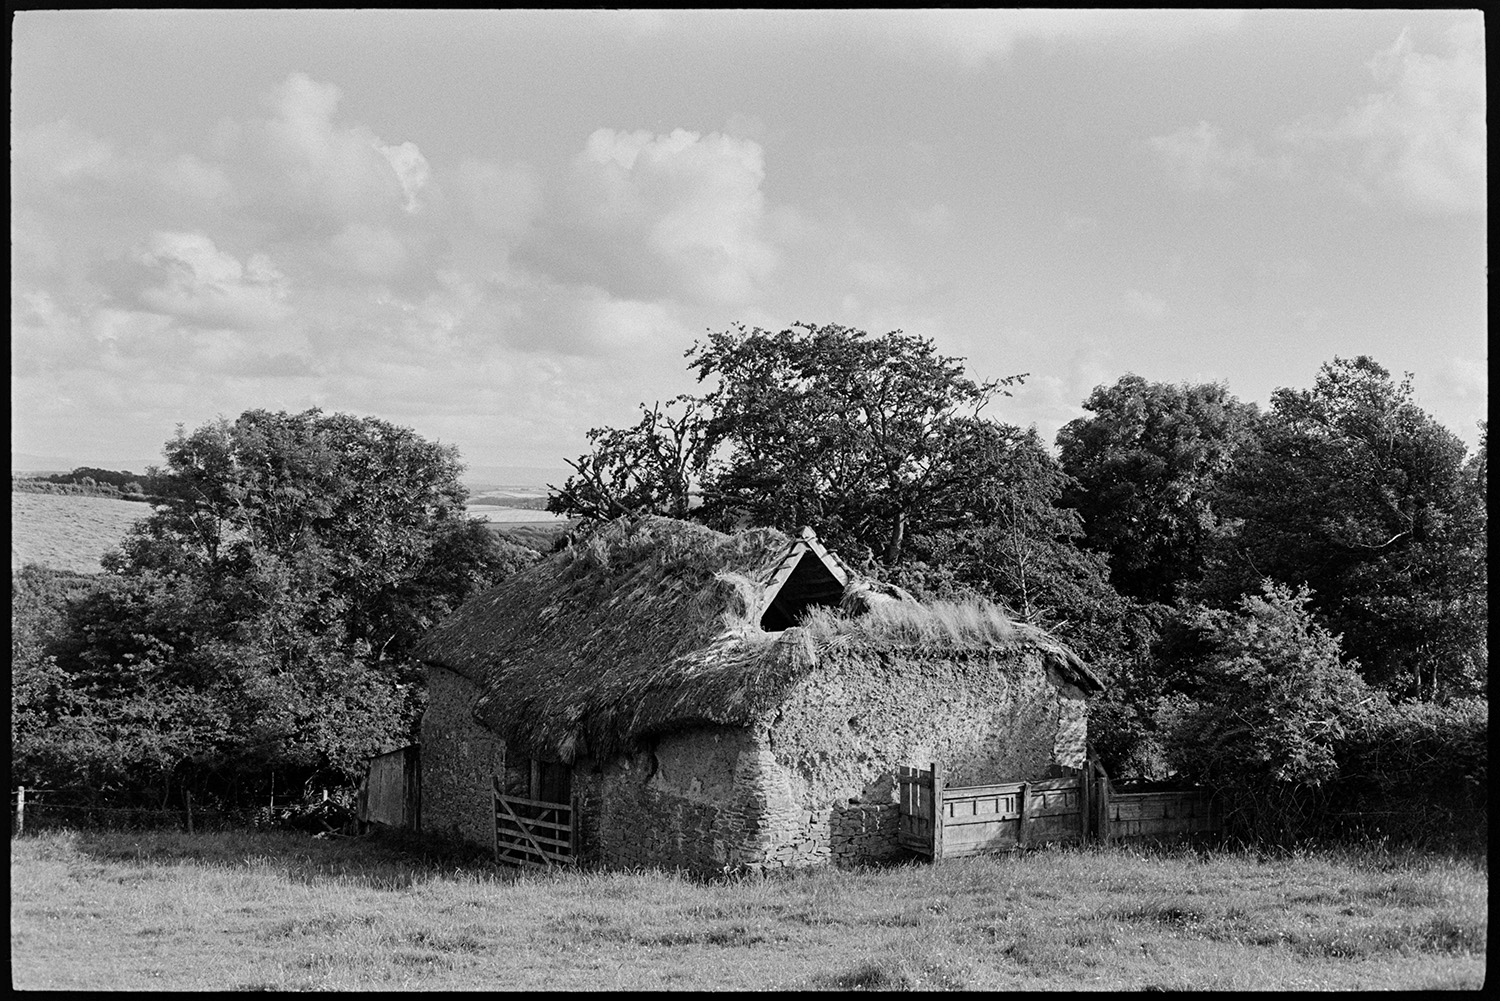 Ruined barn, cob and thatch. 
[A collapsing cob and thatch barn in a field near Beaford Wood.]